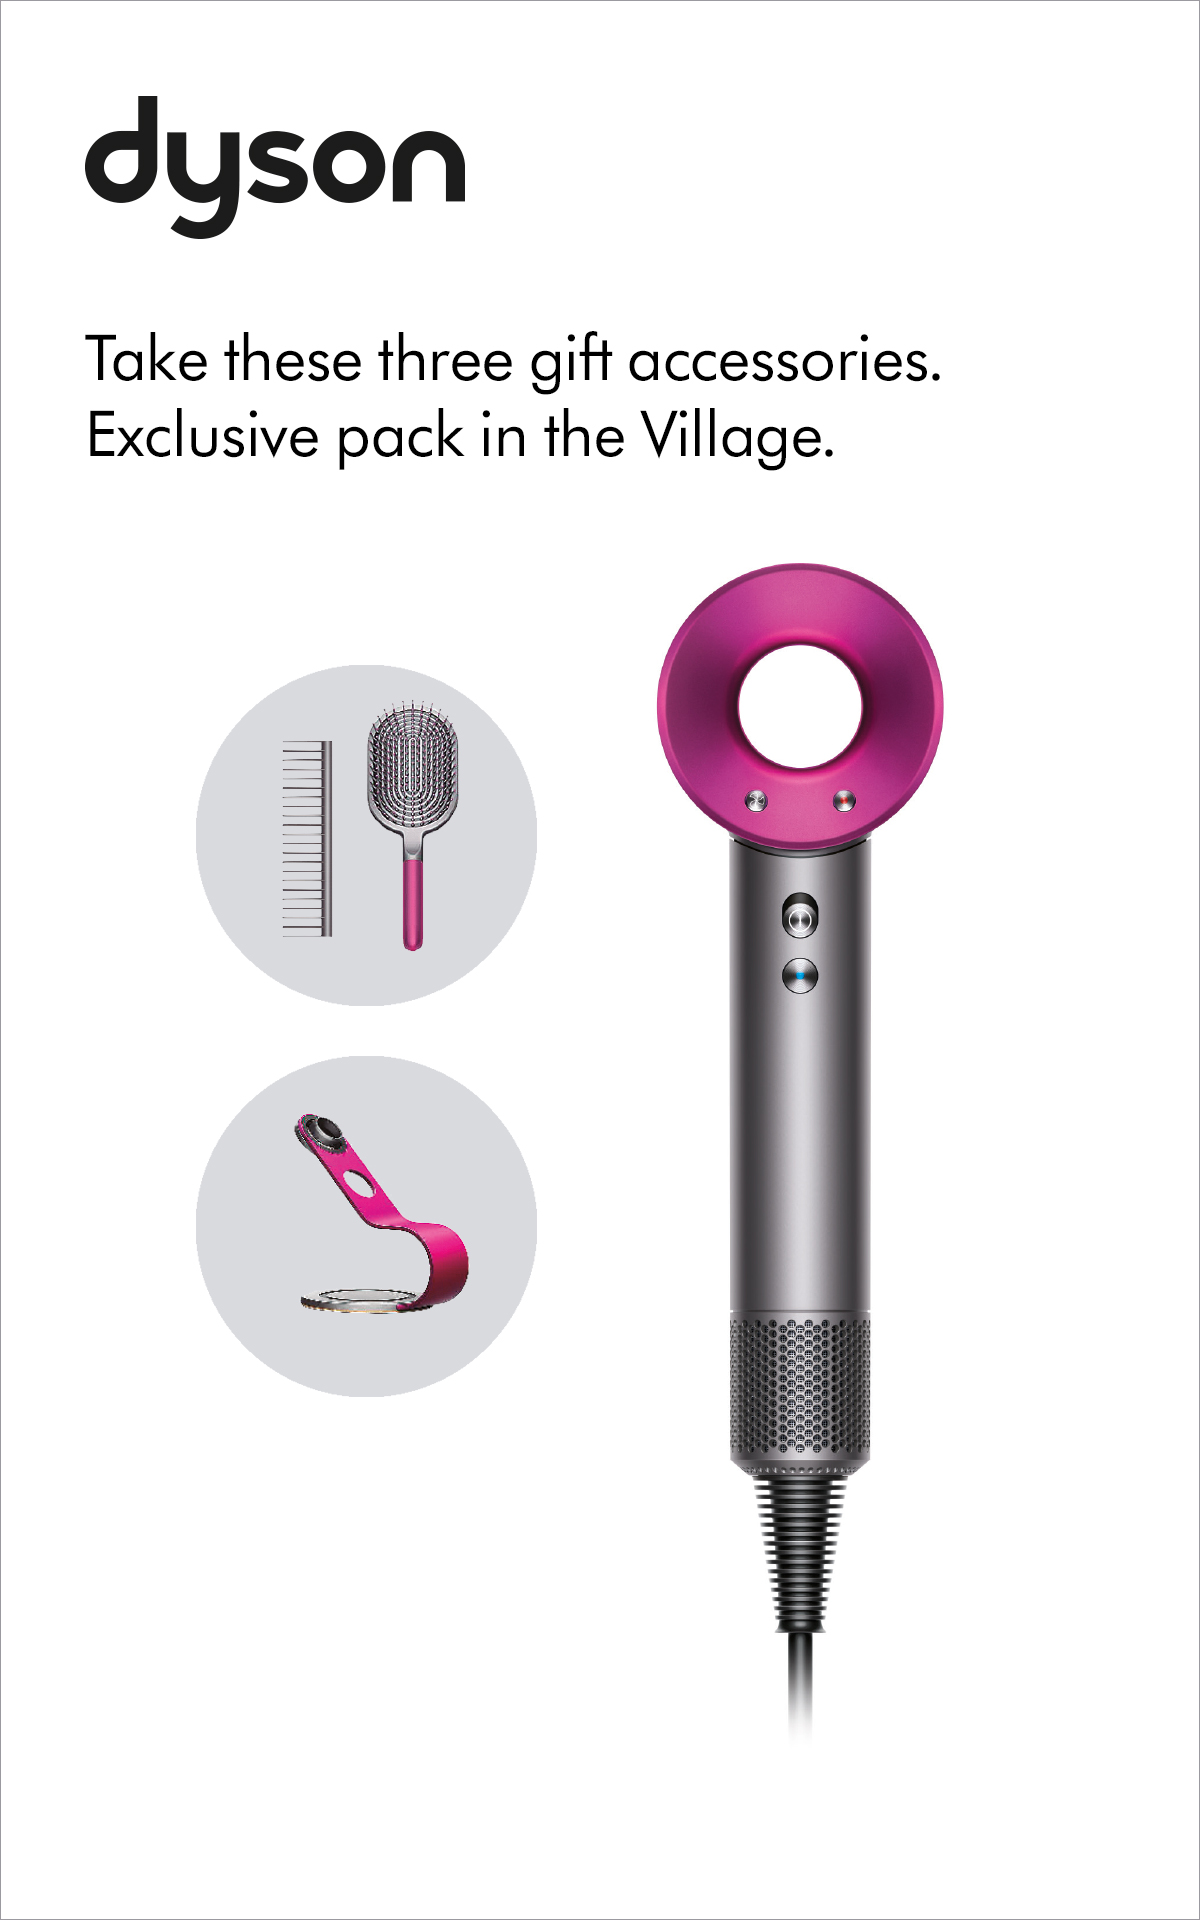 Supersonic dyson hair dryer